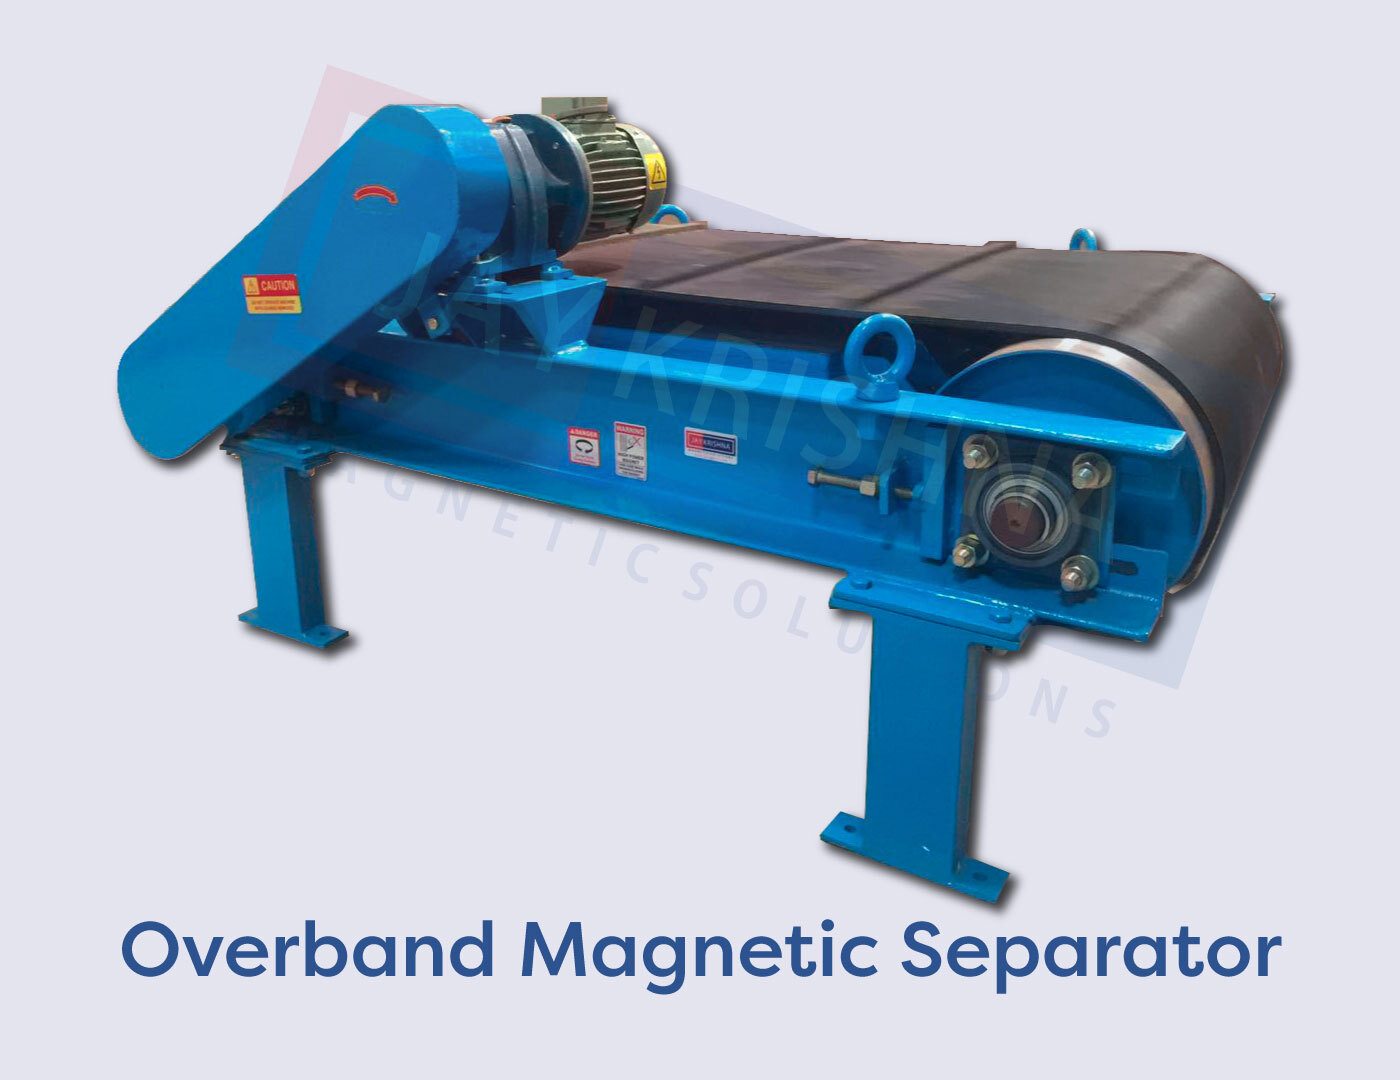 Overband Magnetic Separator Market Trends: Market Review